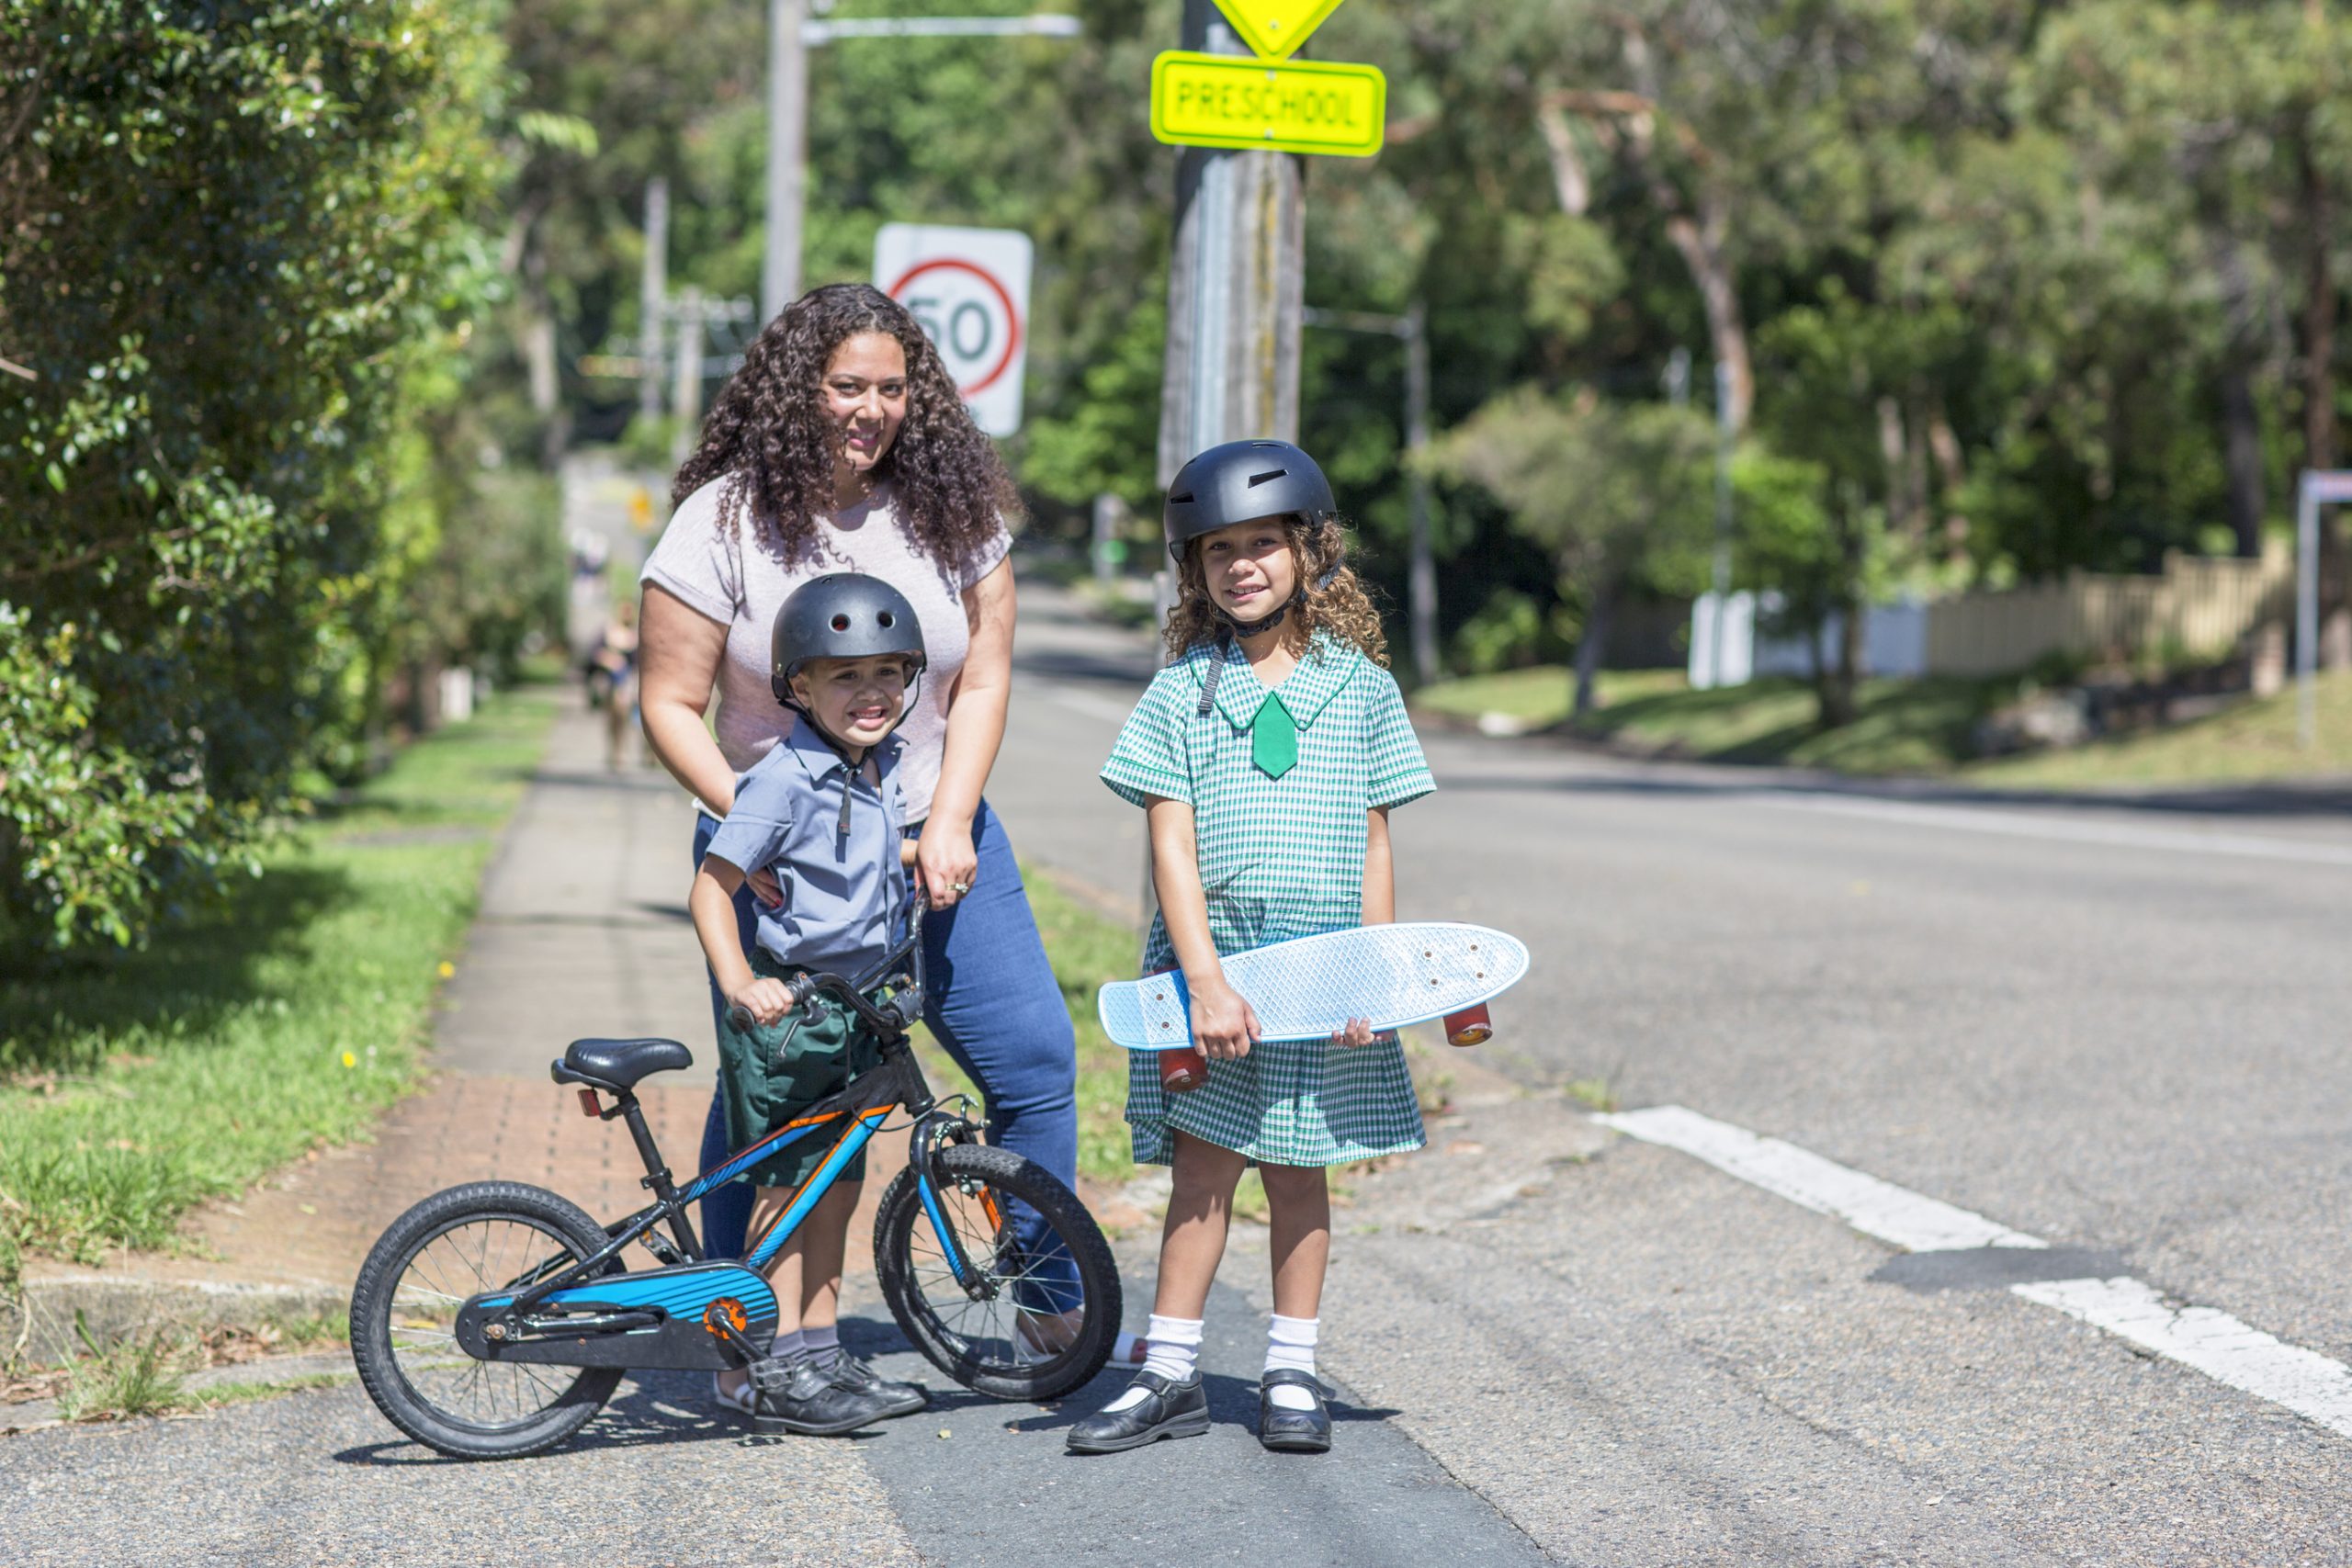 Woman with long dark hair standing on a road, with two children - a young boy aged about 6 years old on push bike and wearing a helmut, a young girl aged 11 years old wearing her school uniform, a helmut and carrying a skateboard